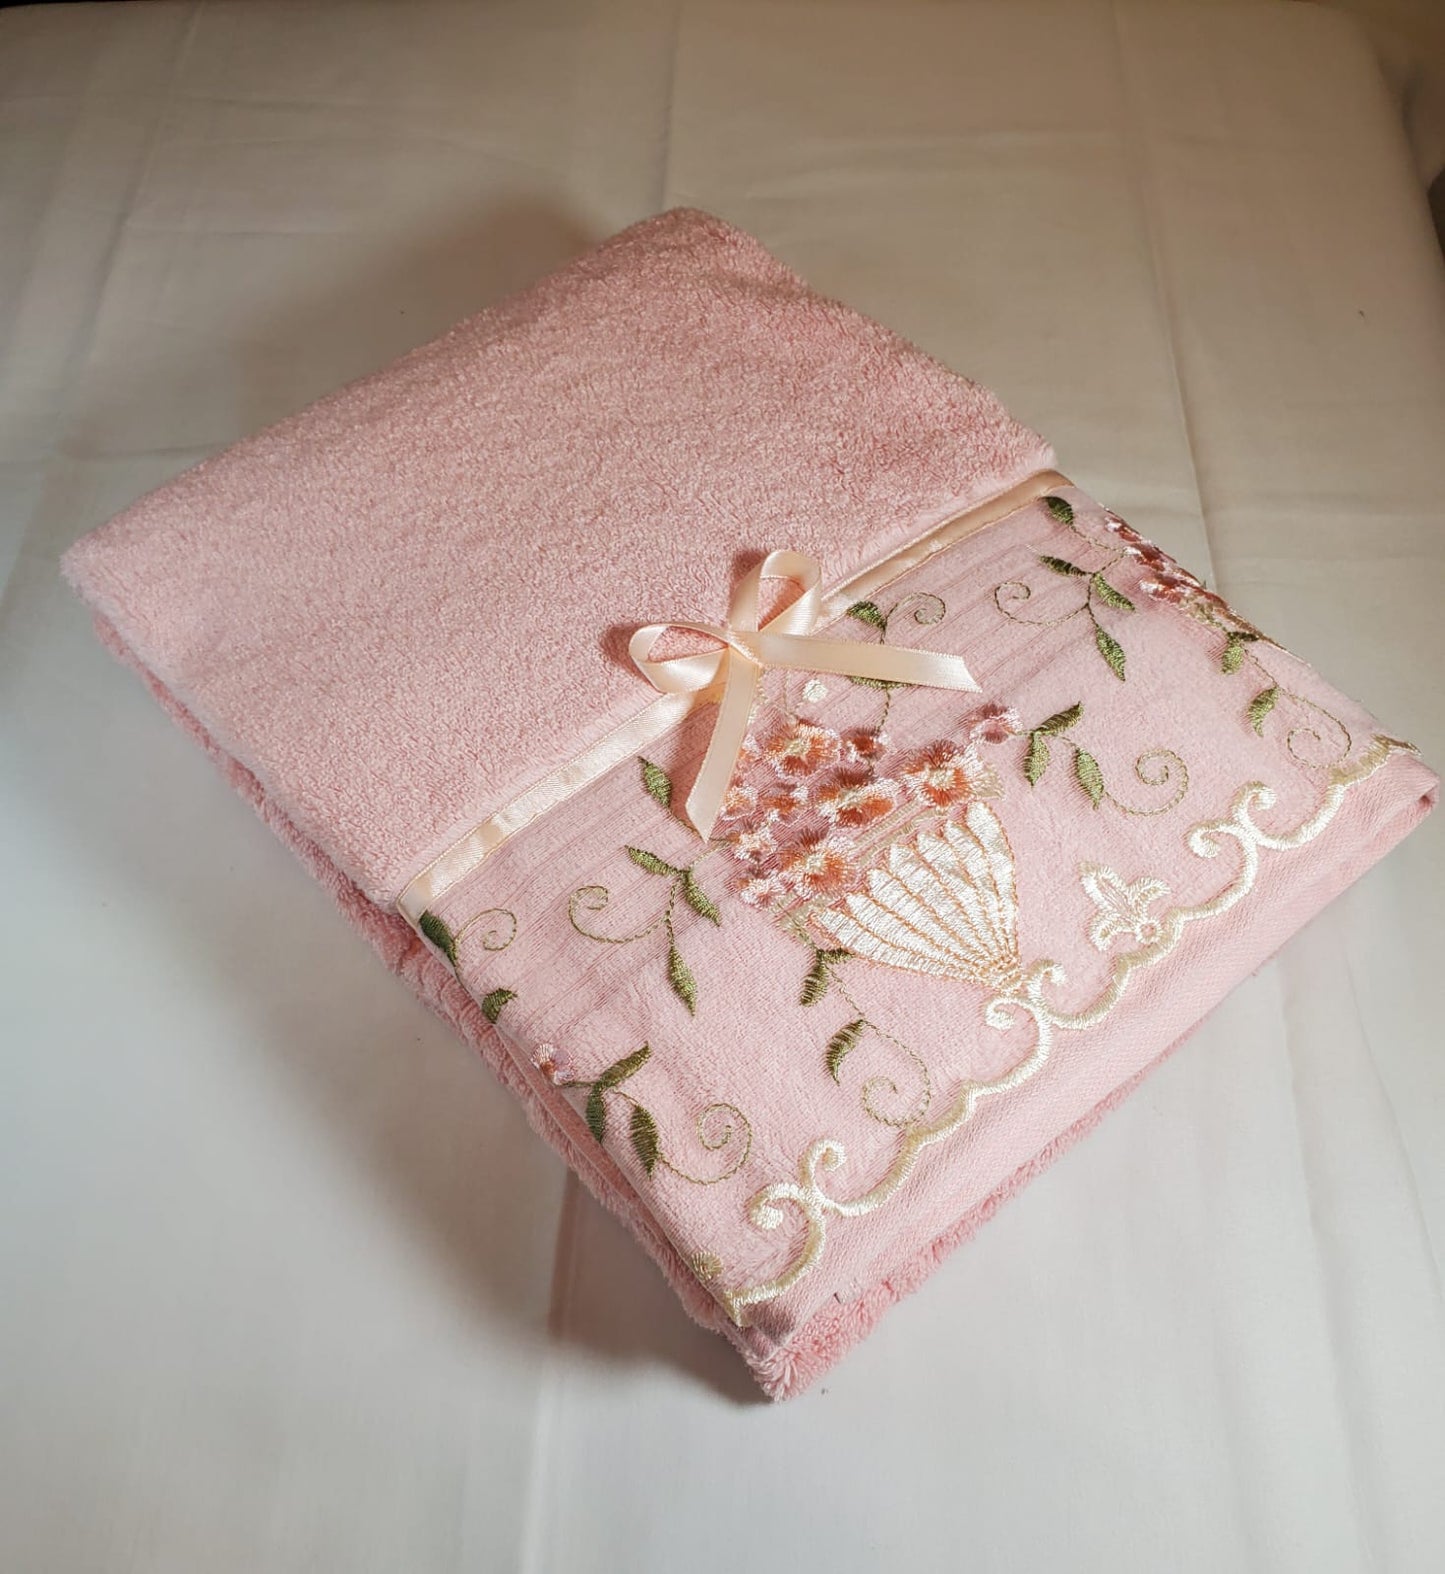 1PC Liz Claiborne Decorative Bath Towel - Large size. Luxurious Embroidered 100% Certified Cotton. Elegantly soft, fluffy and absorbent.